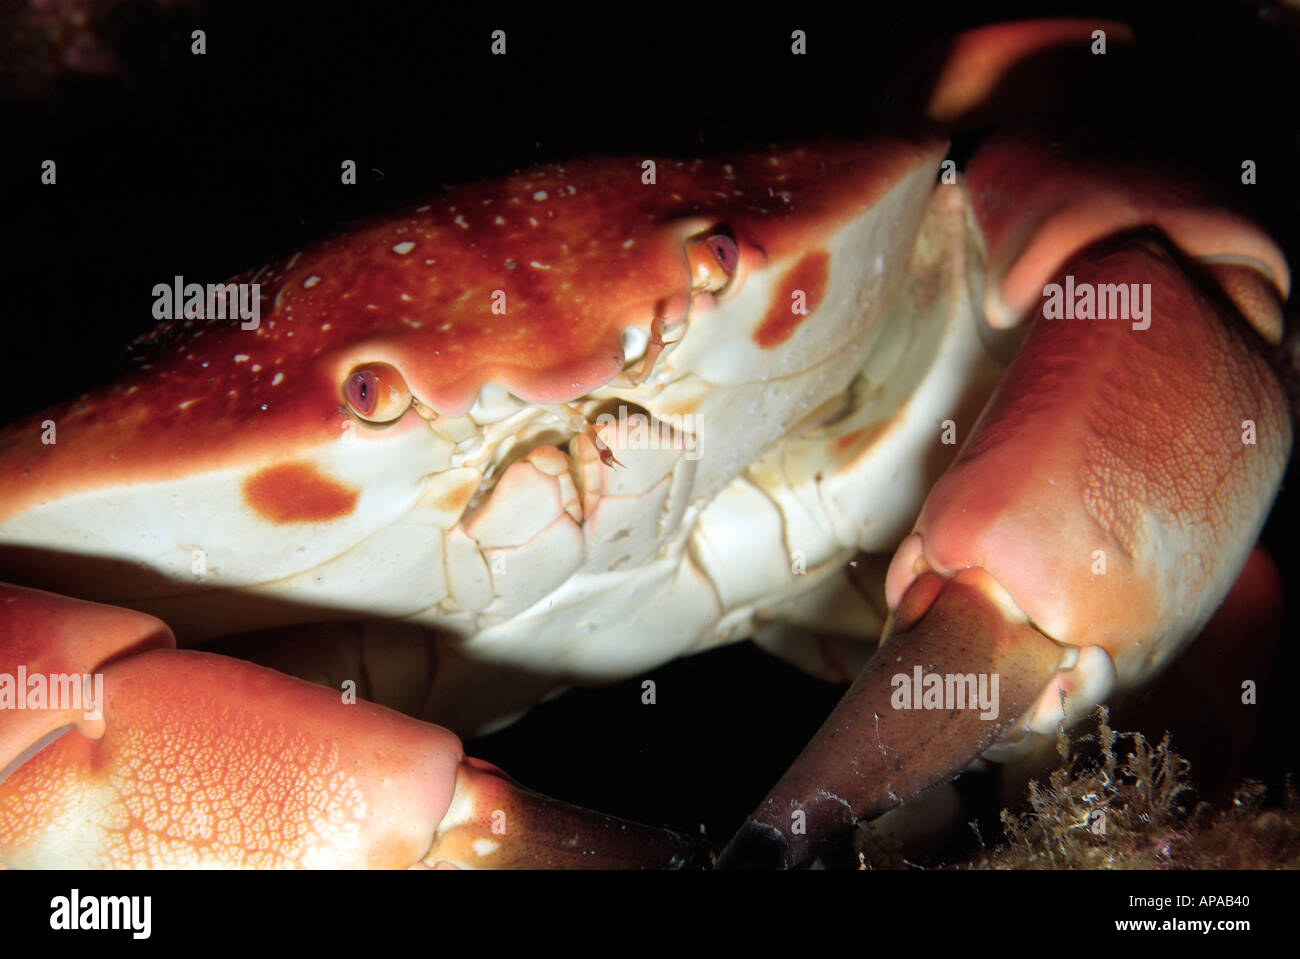 Batwing coral crab in the Gulf of Mexico, off Texas Stock Photo